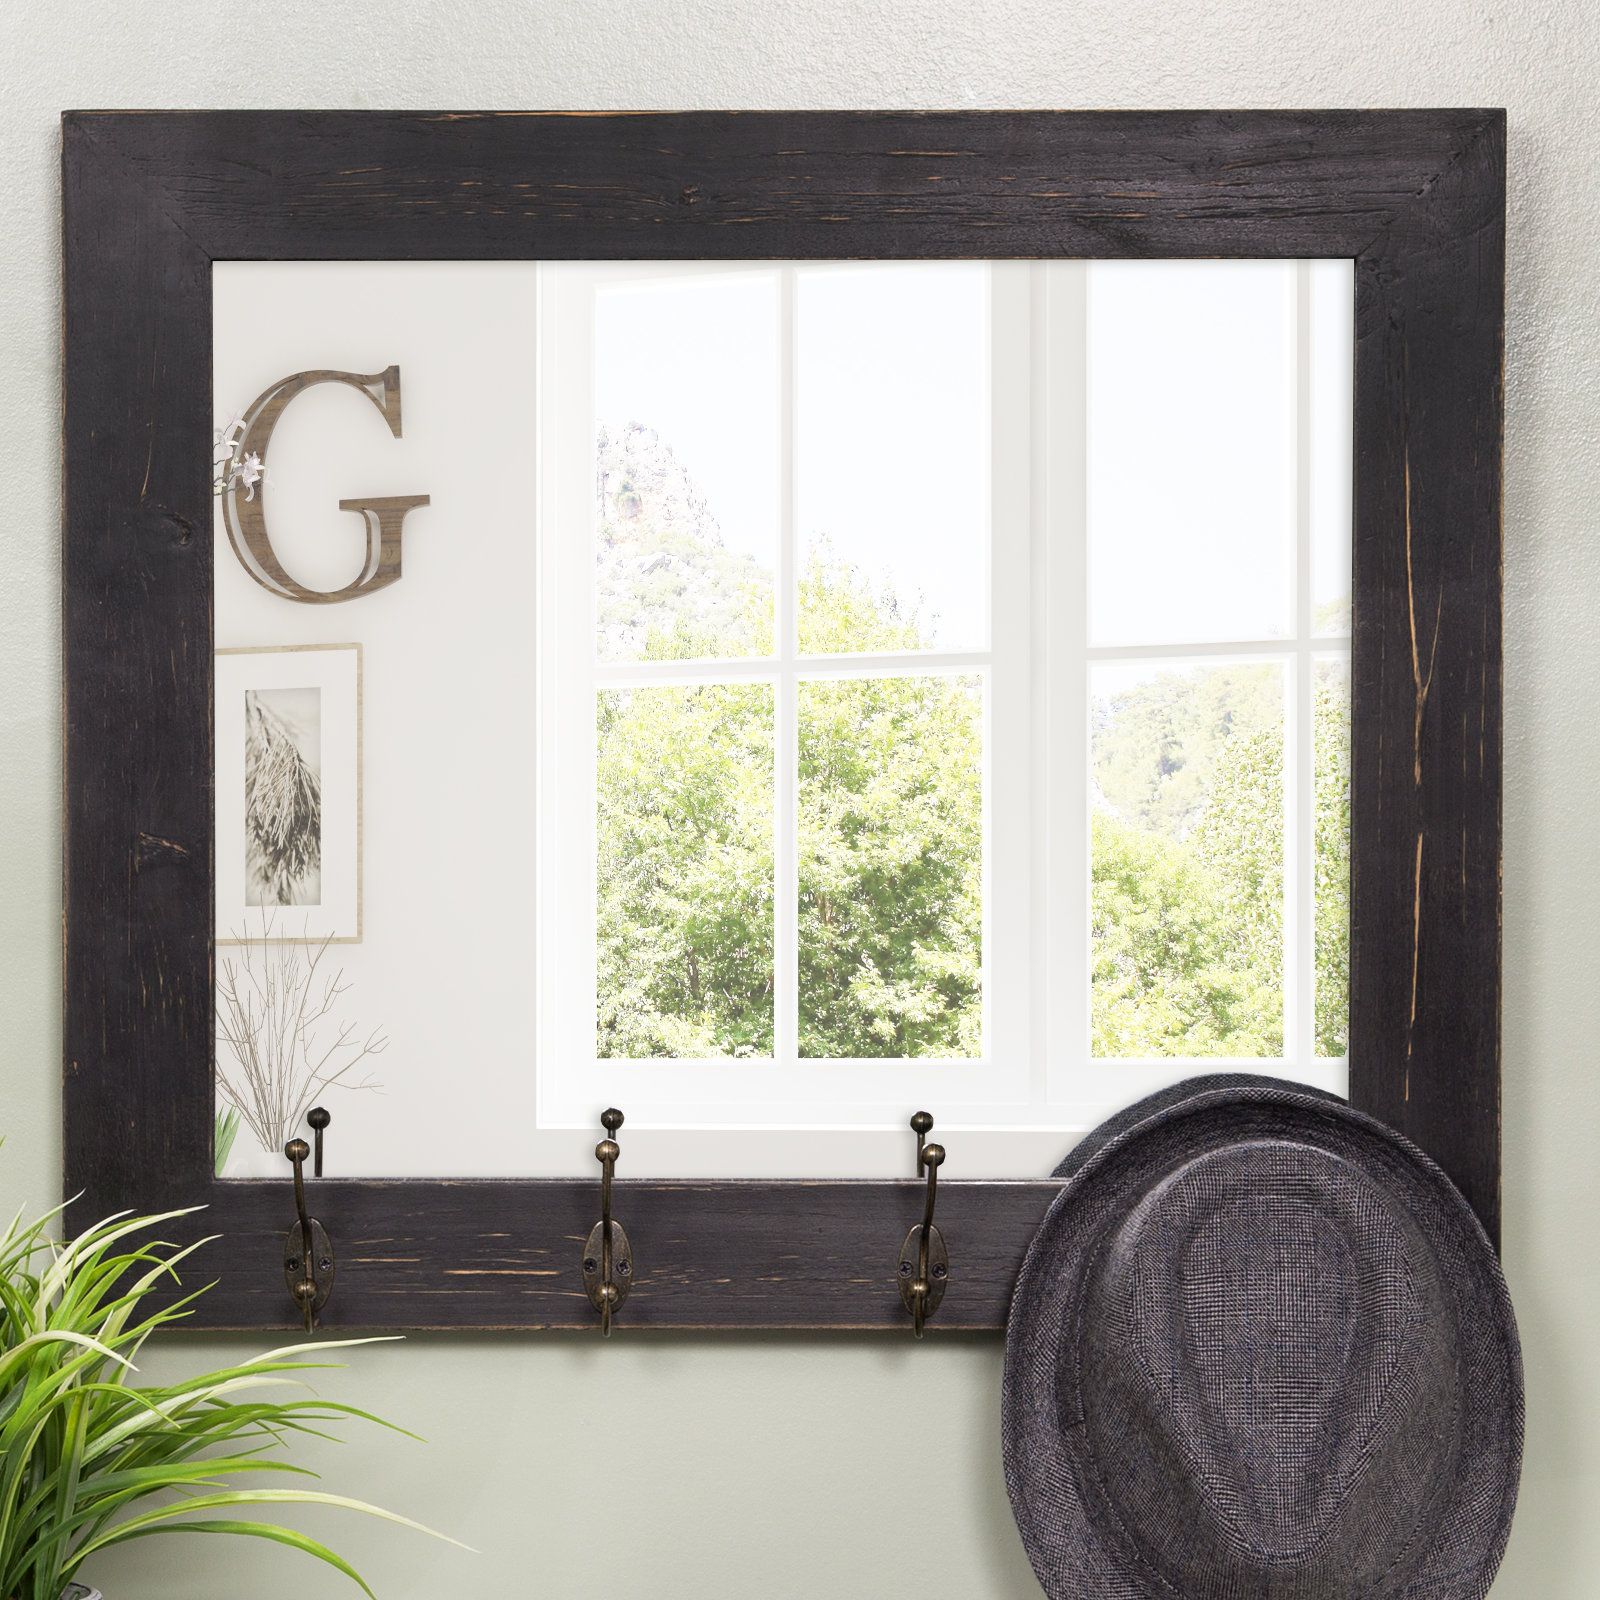 2 Piece Kissena Window Pane Accent Mirror Sets For Most Up To Date Glaucia Rustic Entryway Accent Mirror (View 20 of 20)